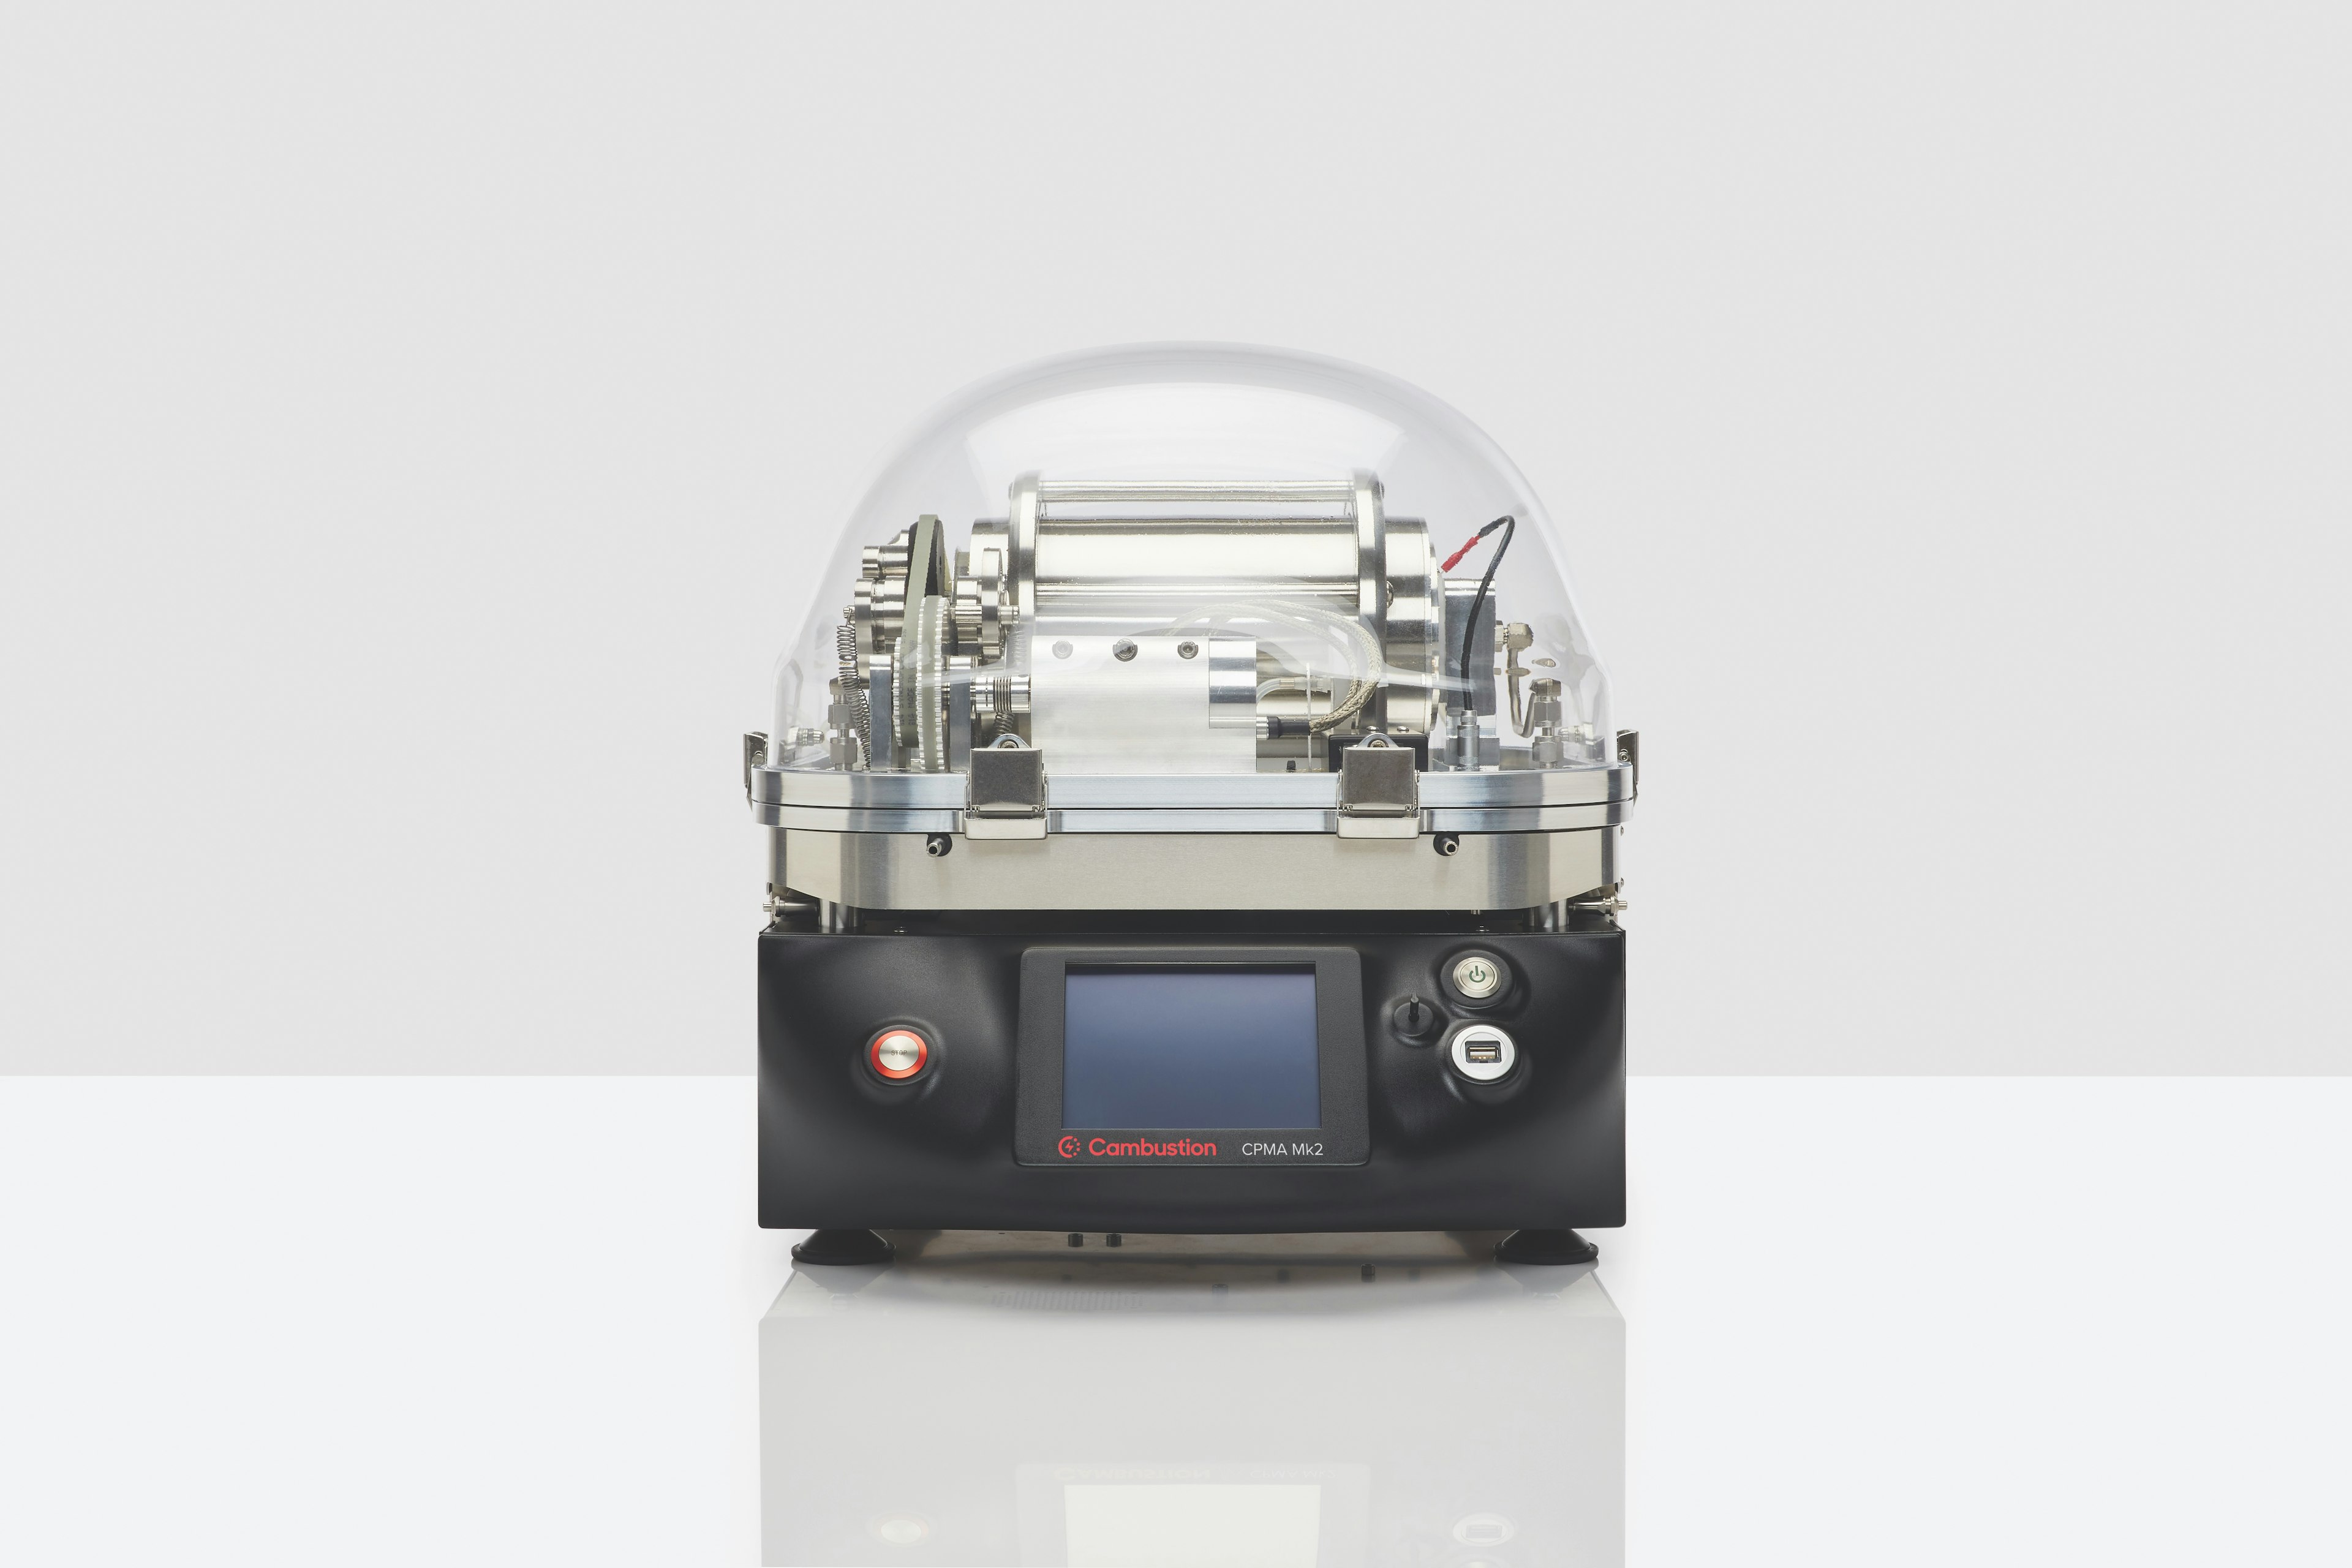 Cambustion CPMA front view showing touchscreen and operation buttons, transparent top showing centrifuge